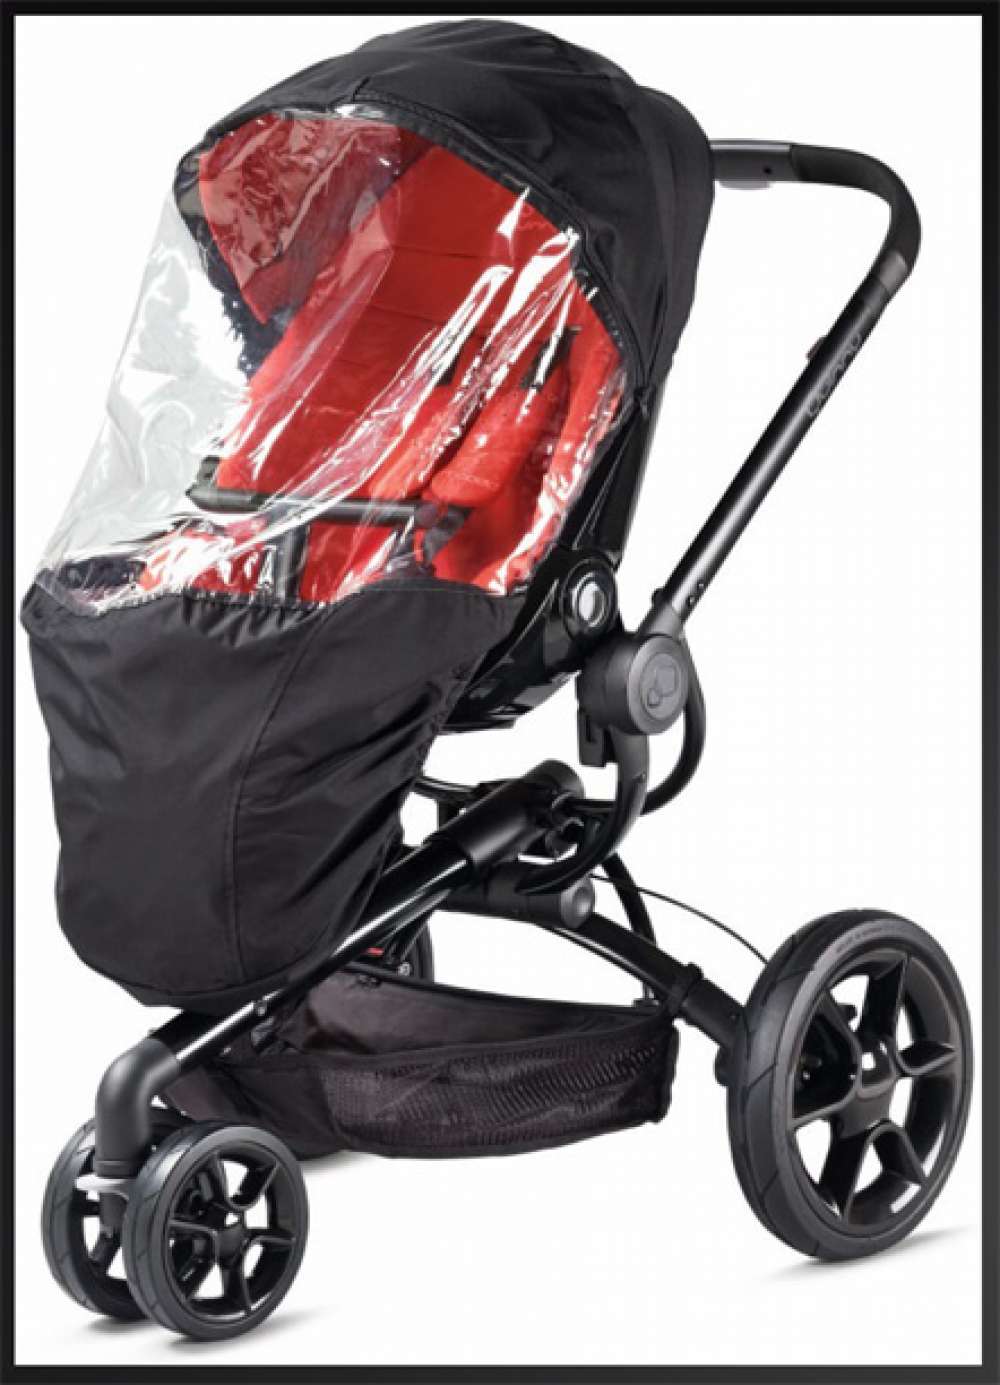 New RAINCOVER Zipped fits QUINNY MOODD Dreami Carrycot & Seat Stroller 